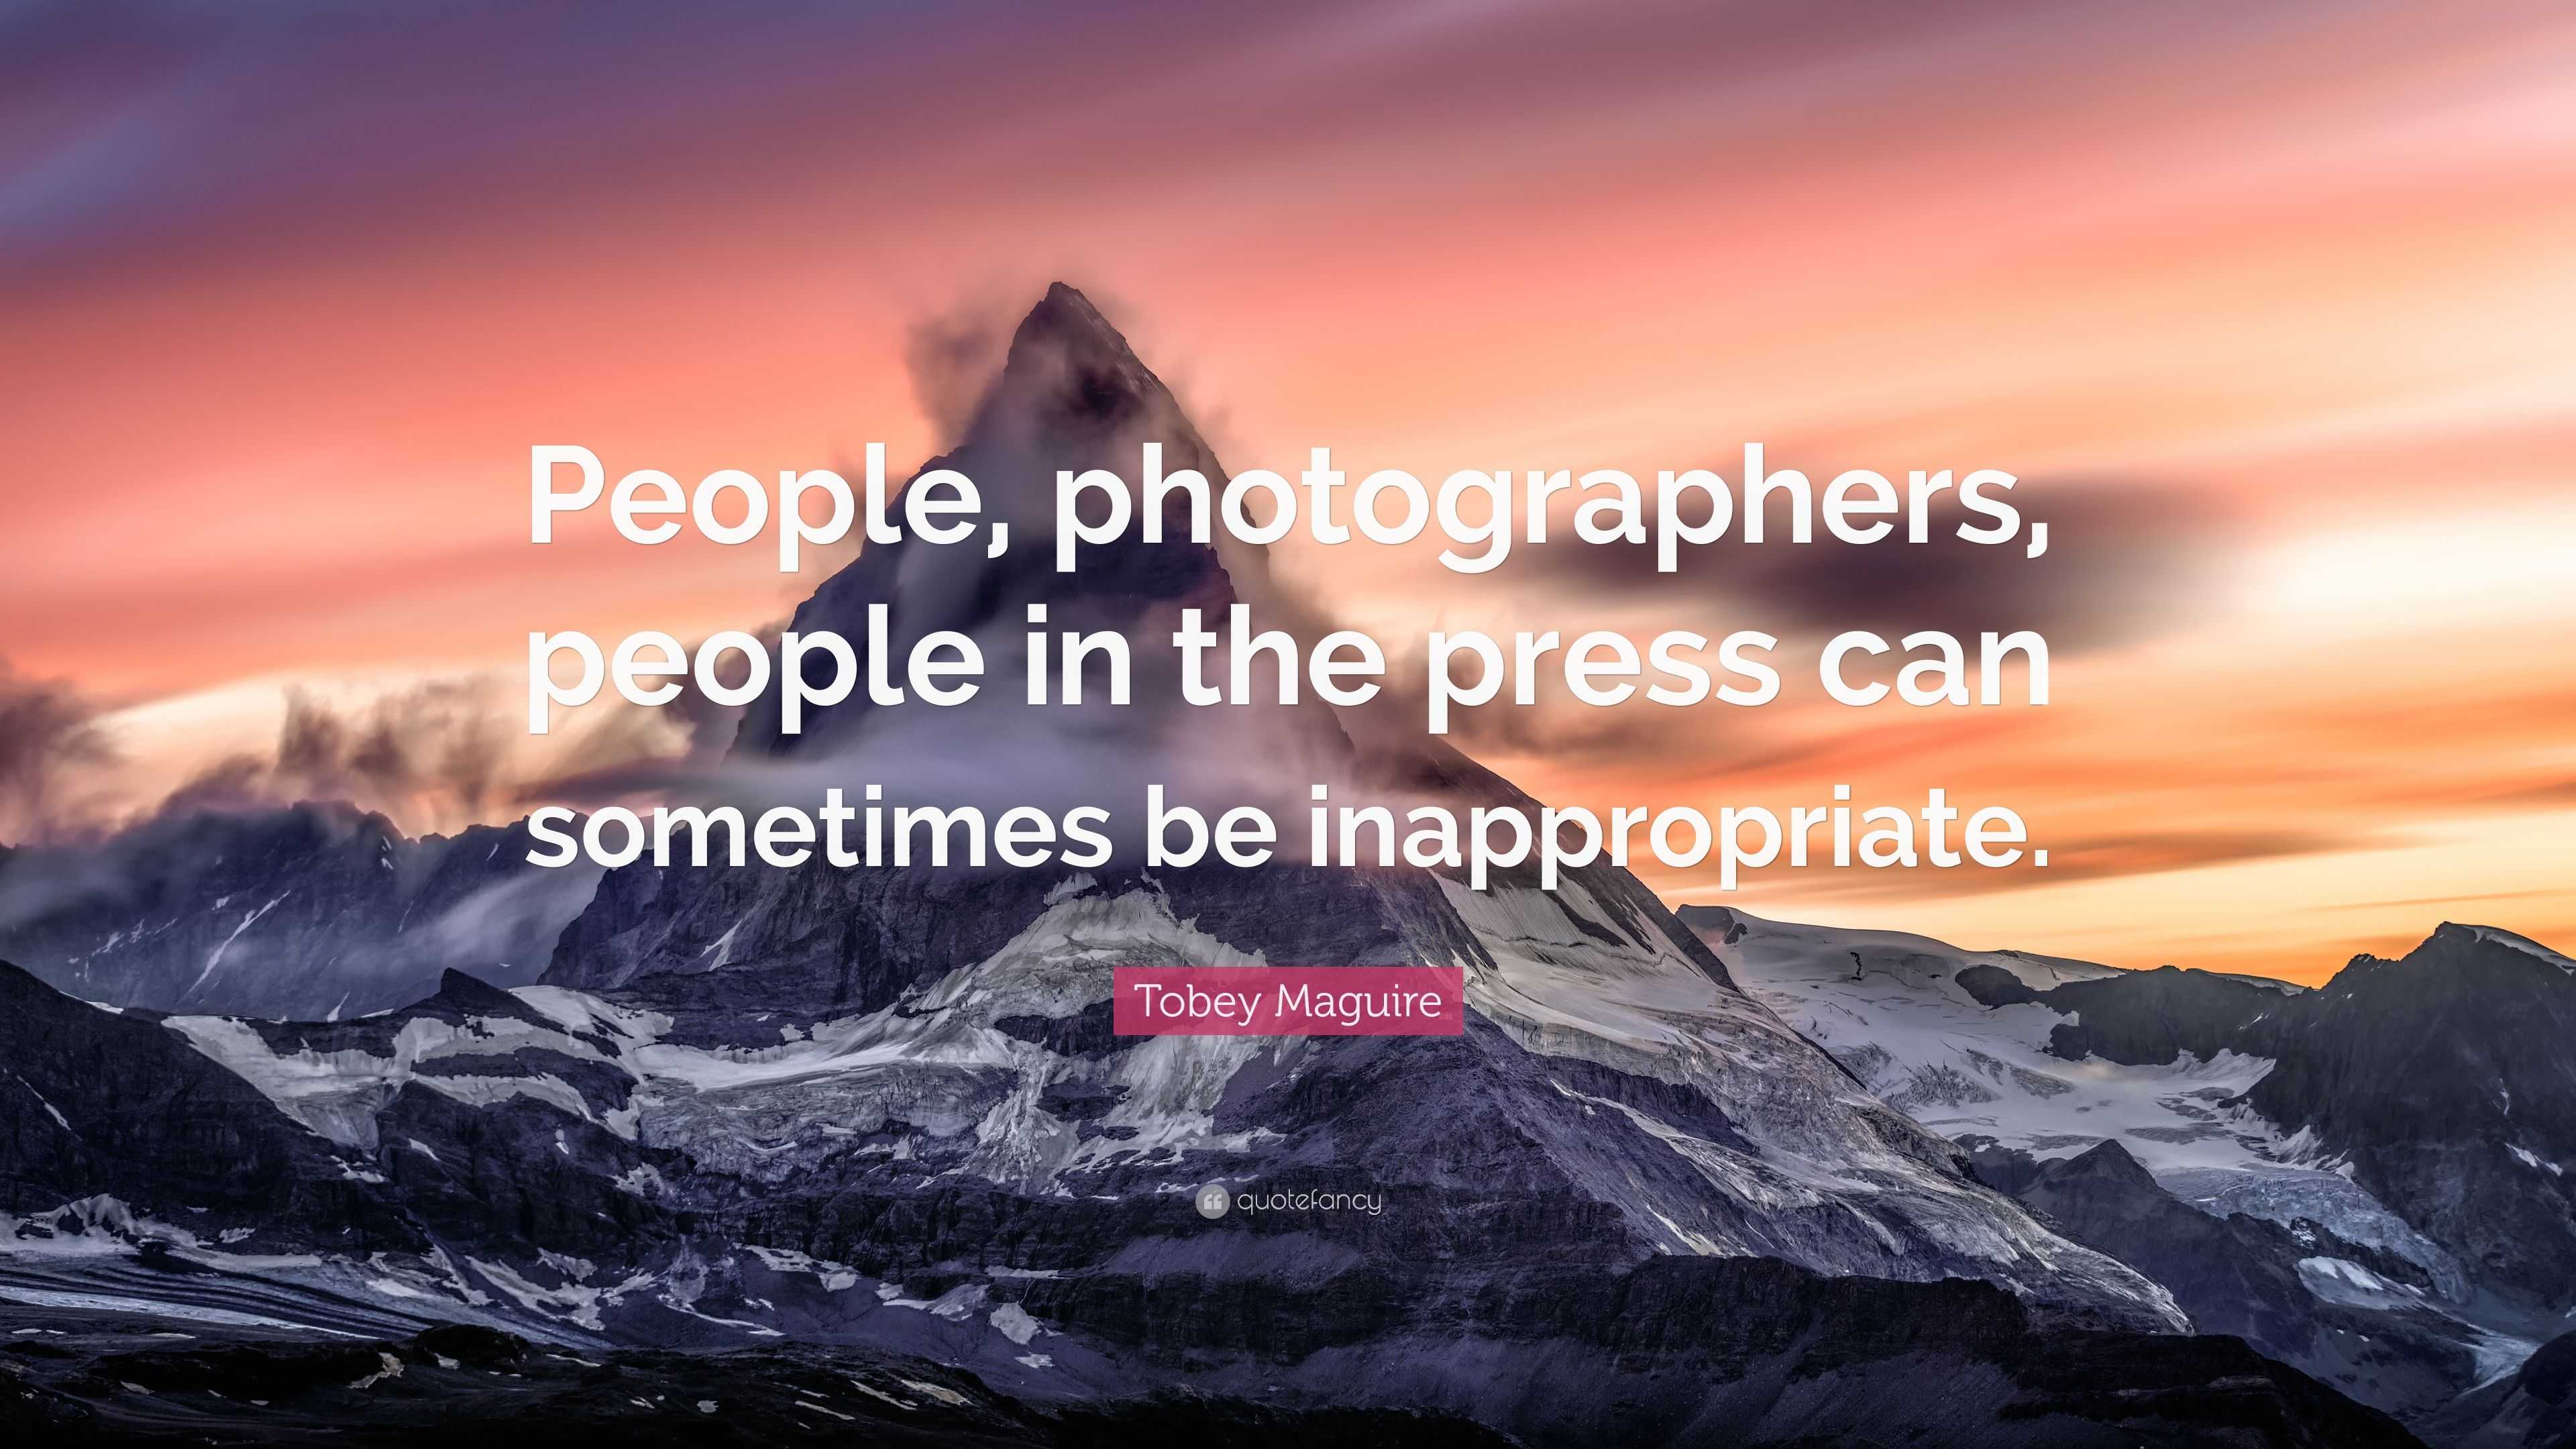 Tobey Maguire Quote: “People, photographers, people in the press can ...